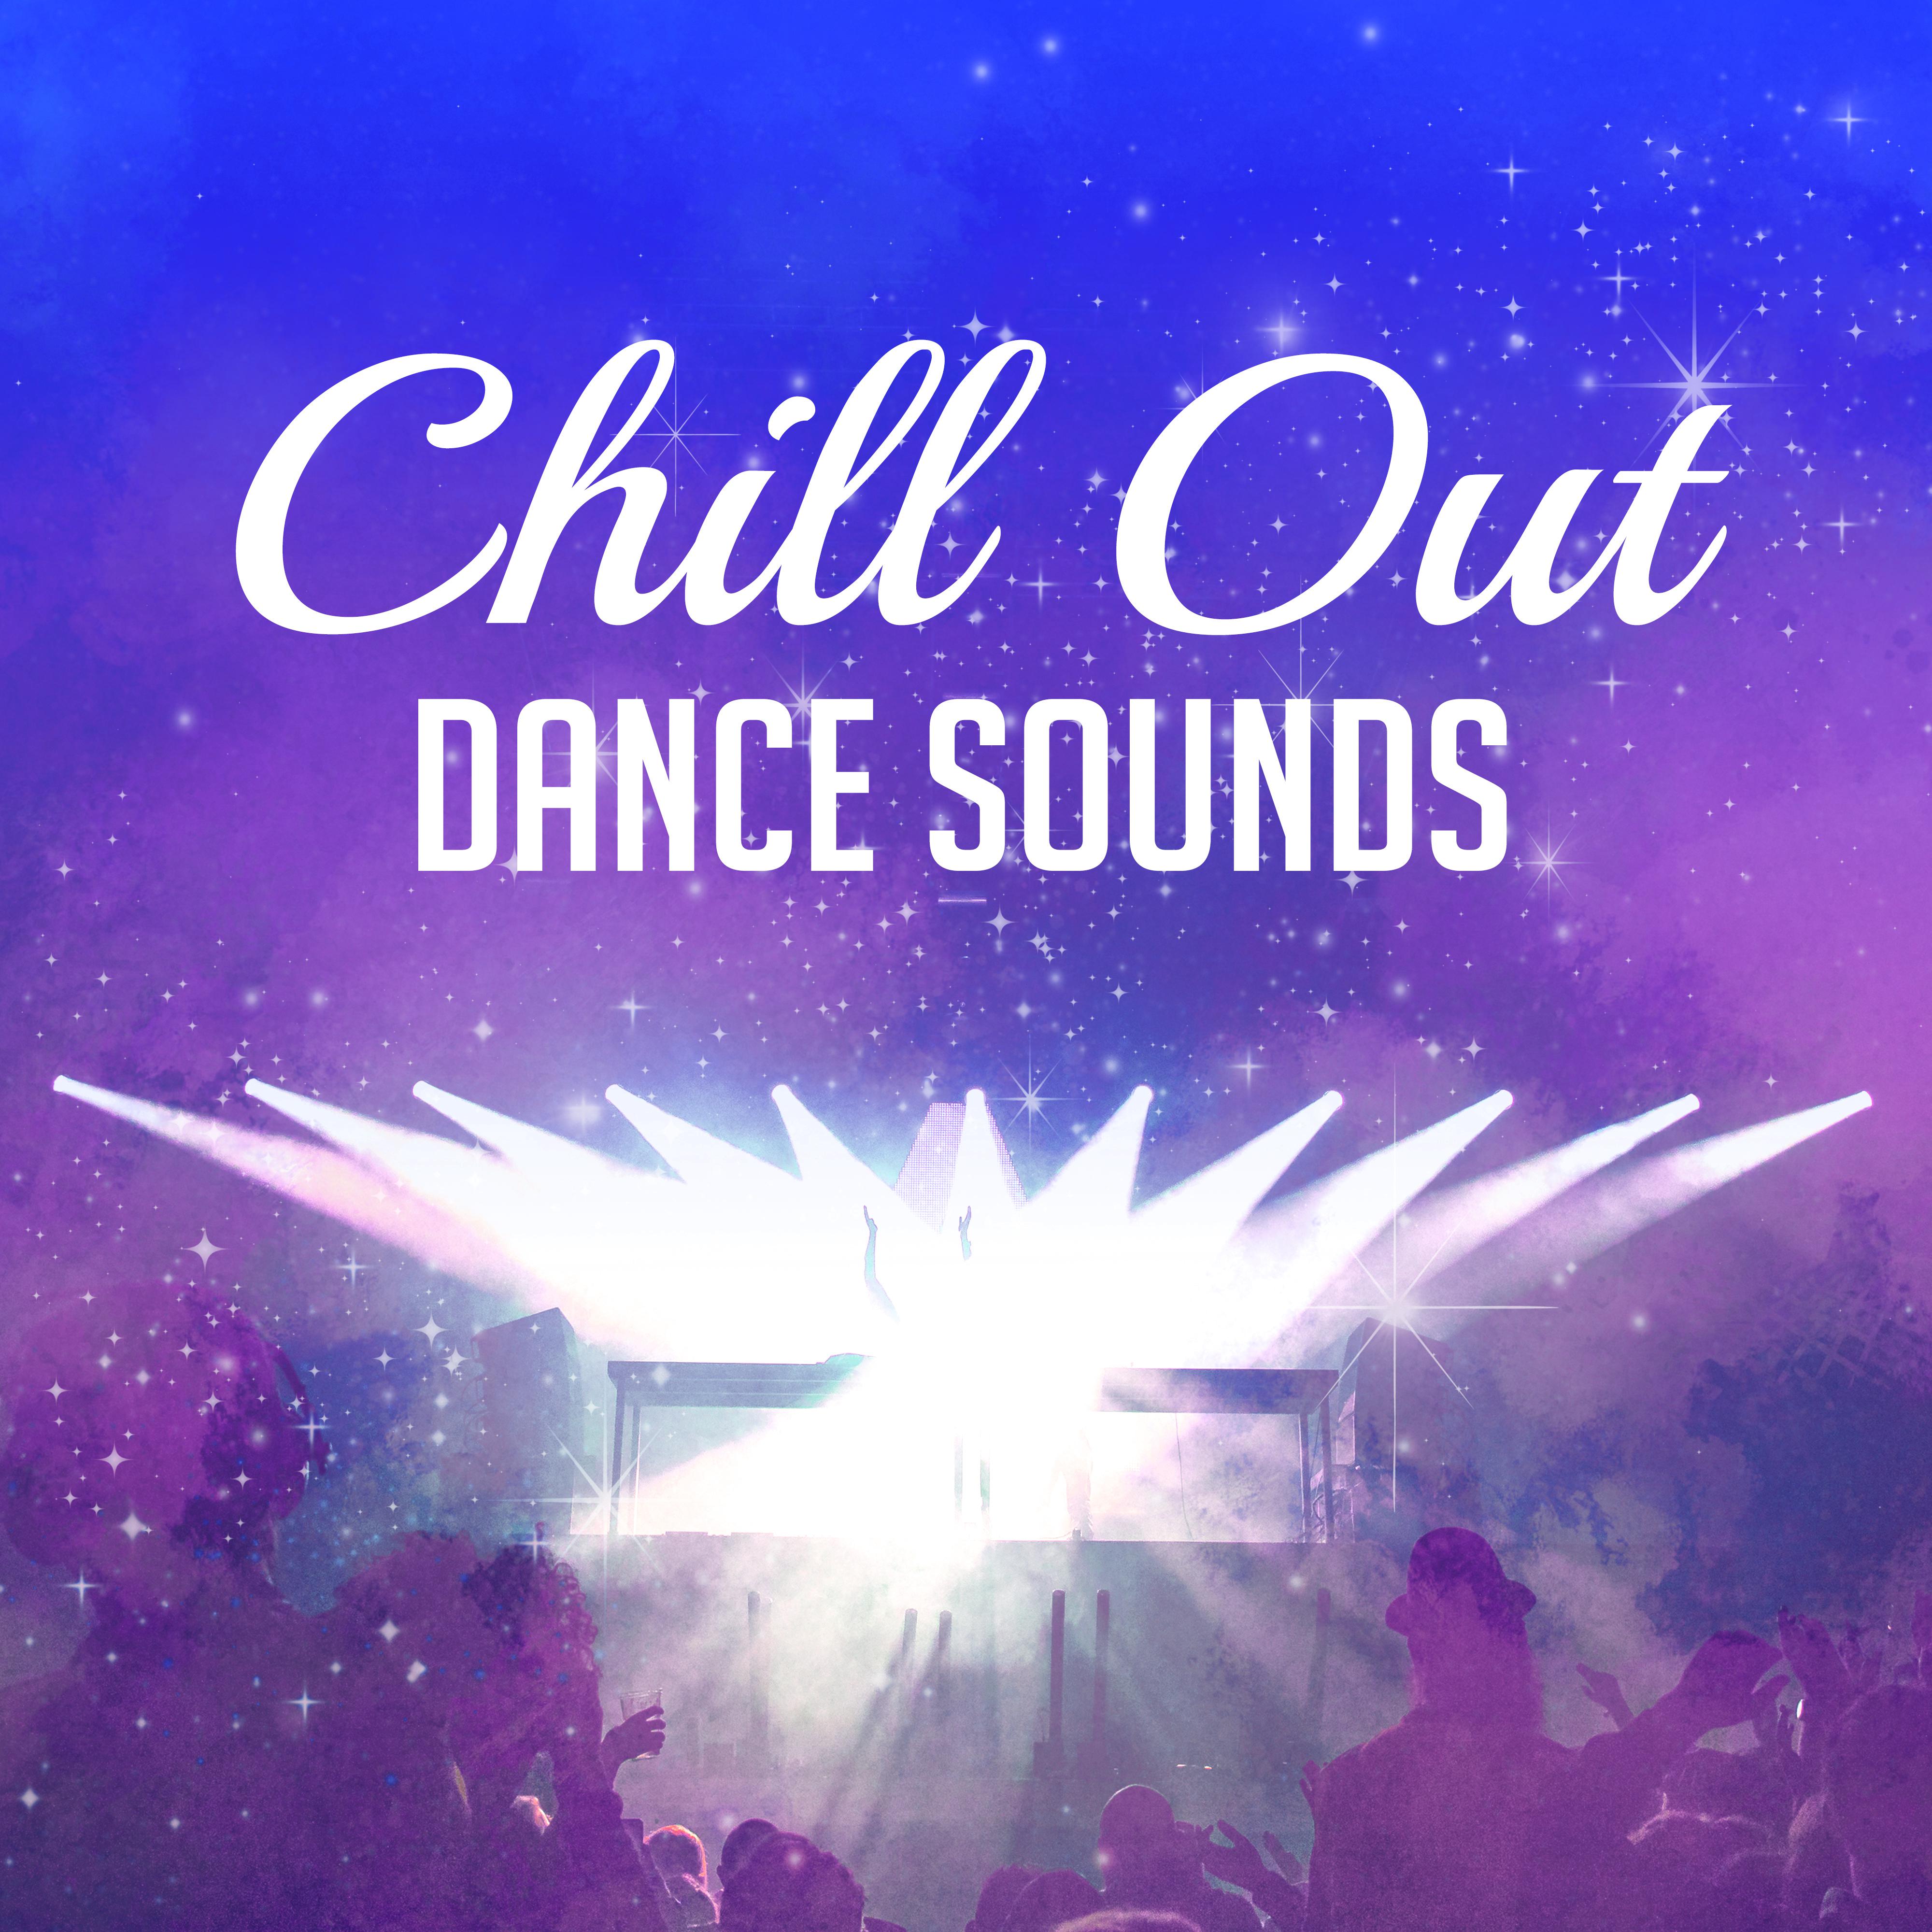 Chill Out Dance Sounds – Party on the Beach, Ibiza Night, Hot Dancefloor, Chill Out 2017